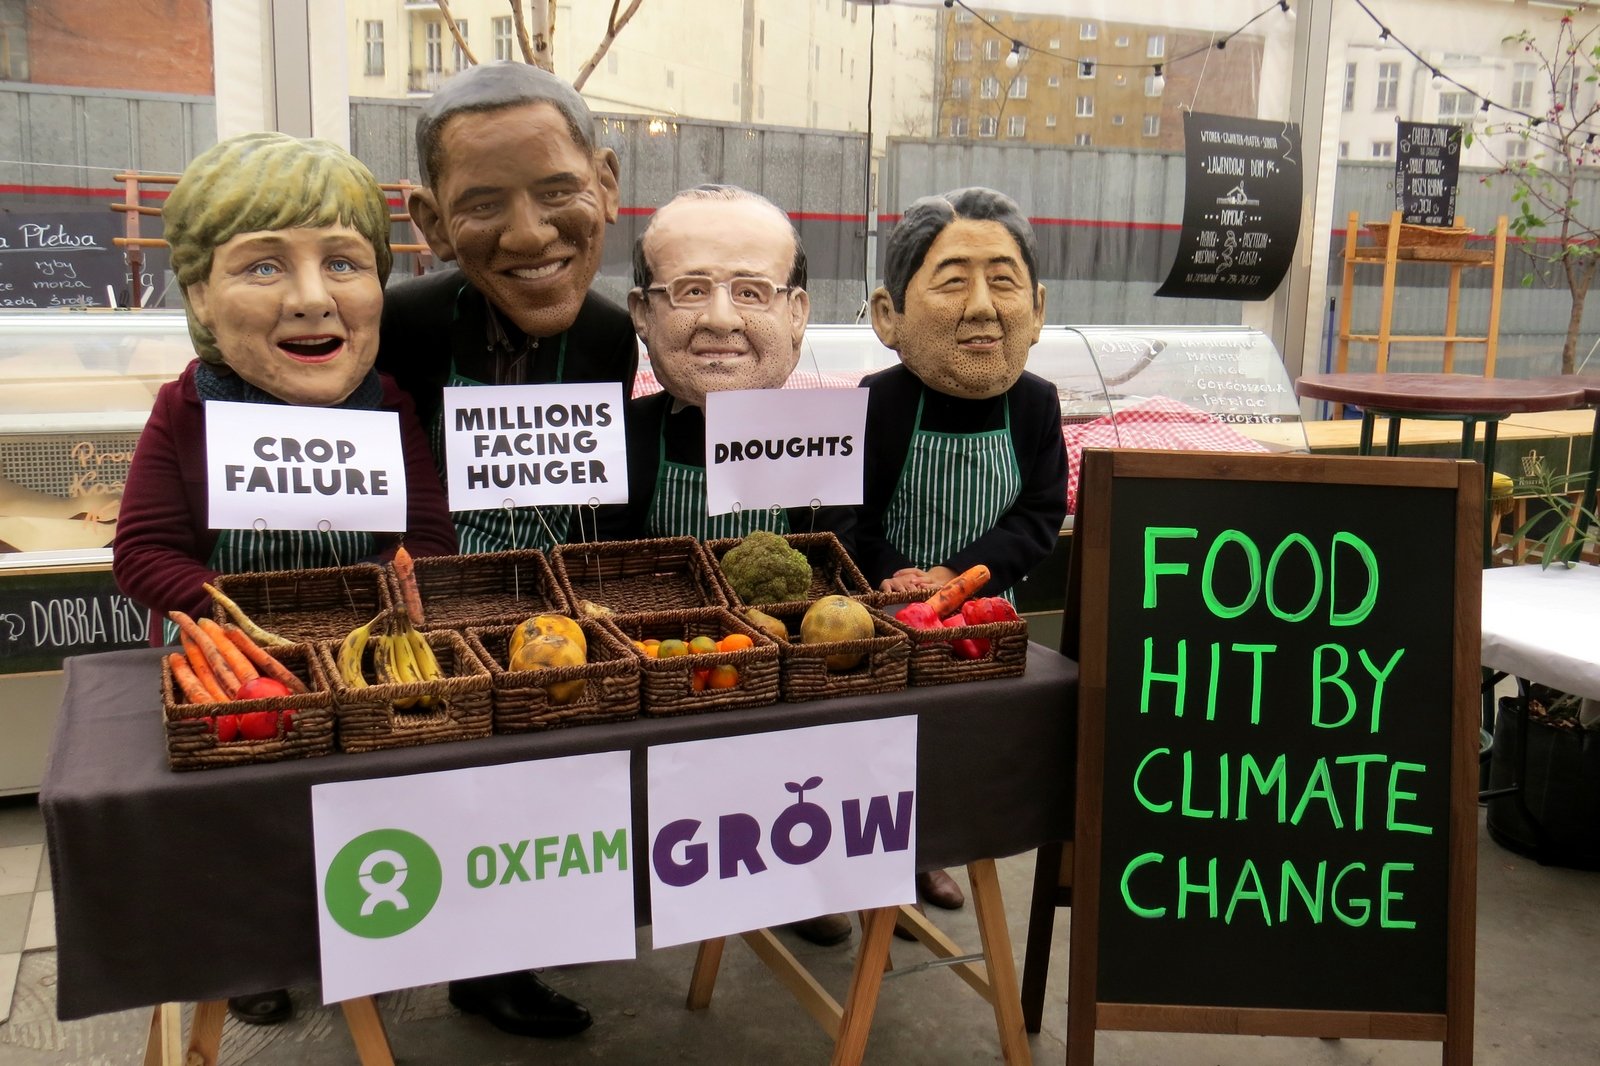 On the eve of the opening of the UN Climate Change Conference in Warsaw, Oxfam’s giant puppet heads of representing world leaders were selling inedible fruit and vegetables from their market stall. All the produce has been destroyed by increasingly unpredictable and extreme weather – made worse by climate change.